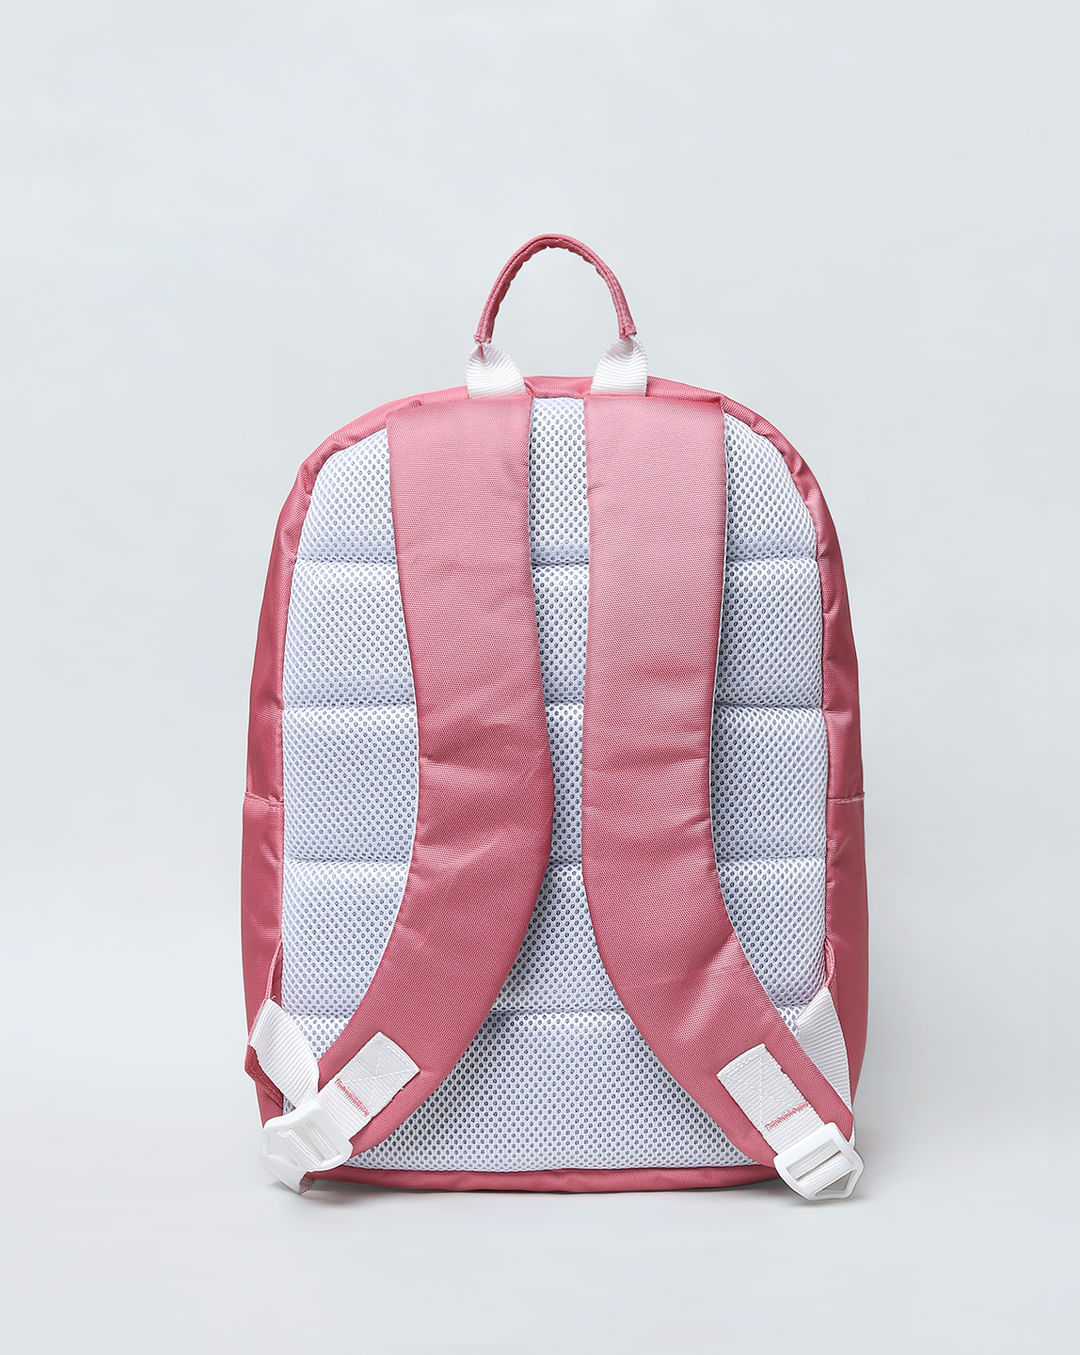 ONLY PLAY PINK BACKPACK